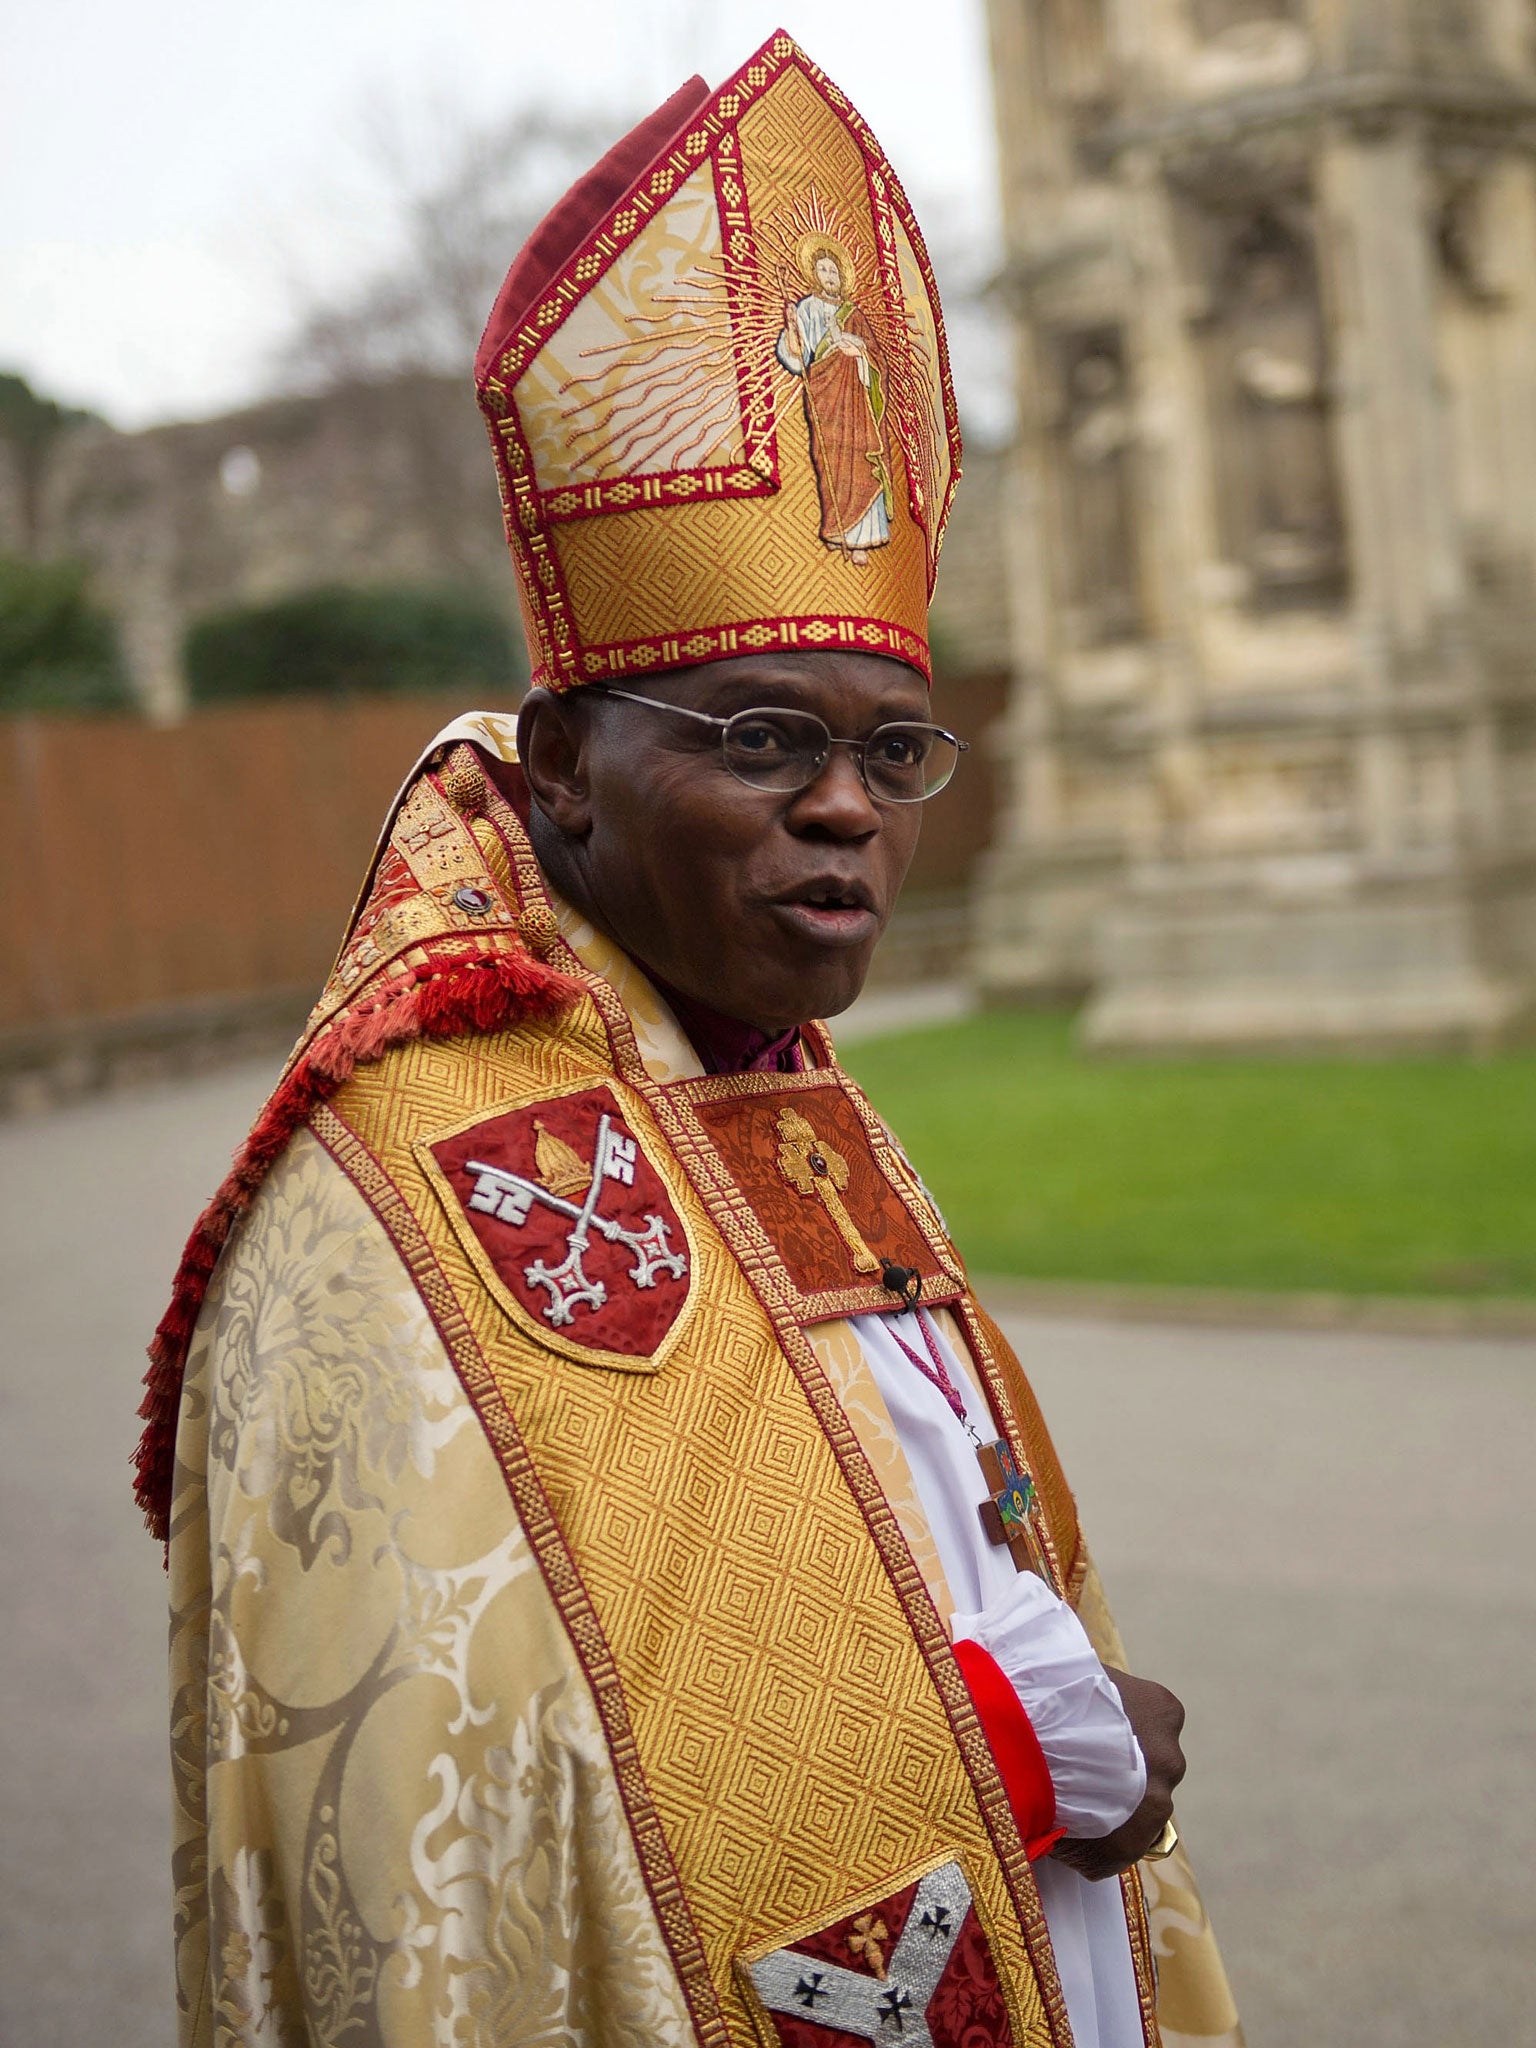 The Archbishop of York John Sentamu has been treated for prostate cancer